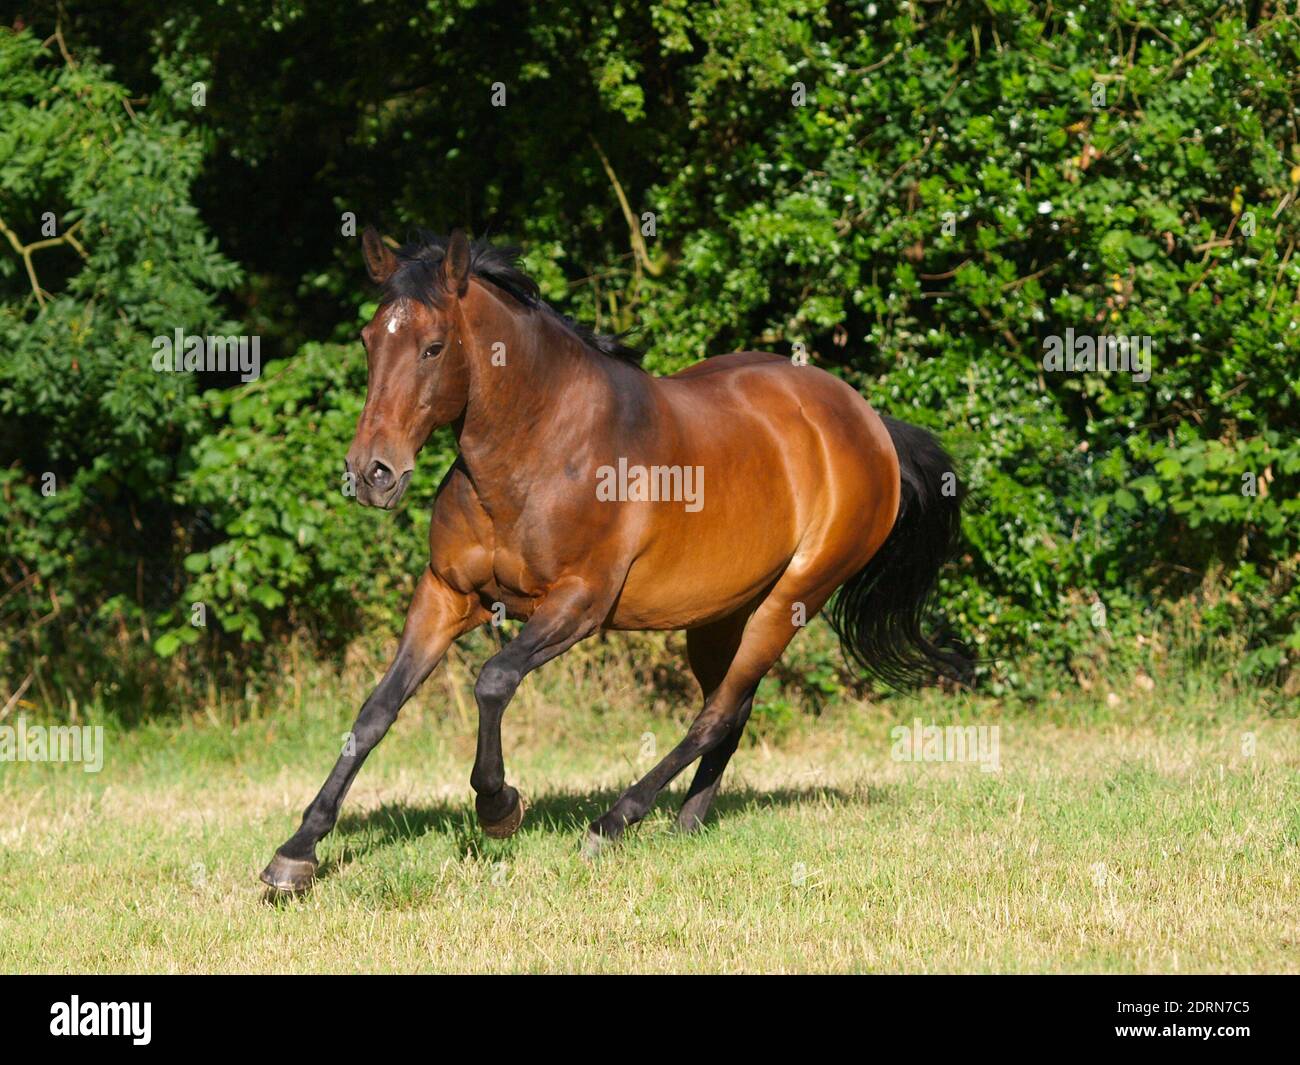 A young bay Spanish horse plays and canters around a paddock. Stock Photo